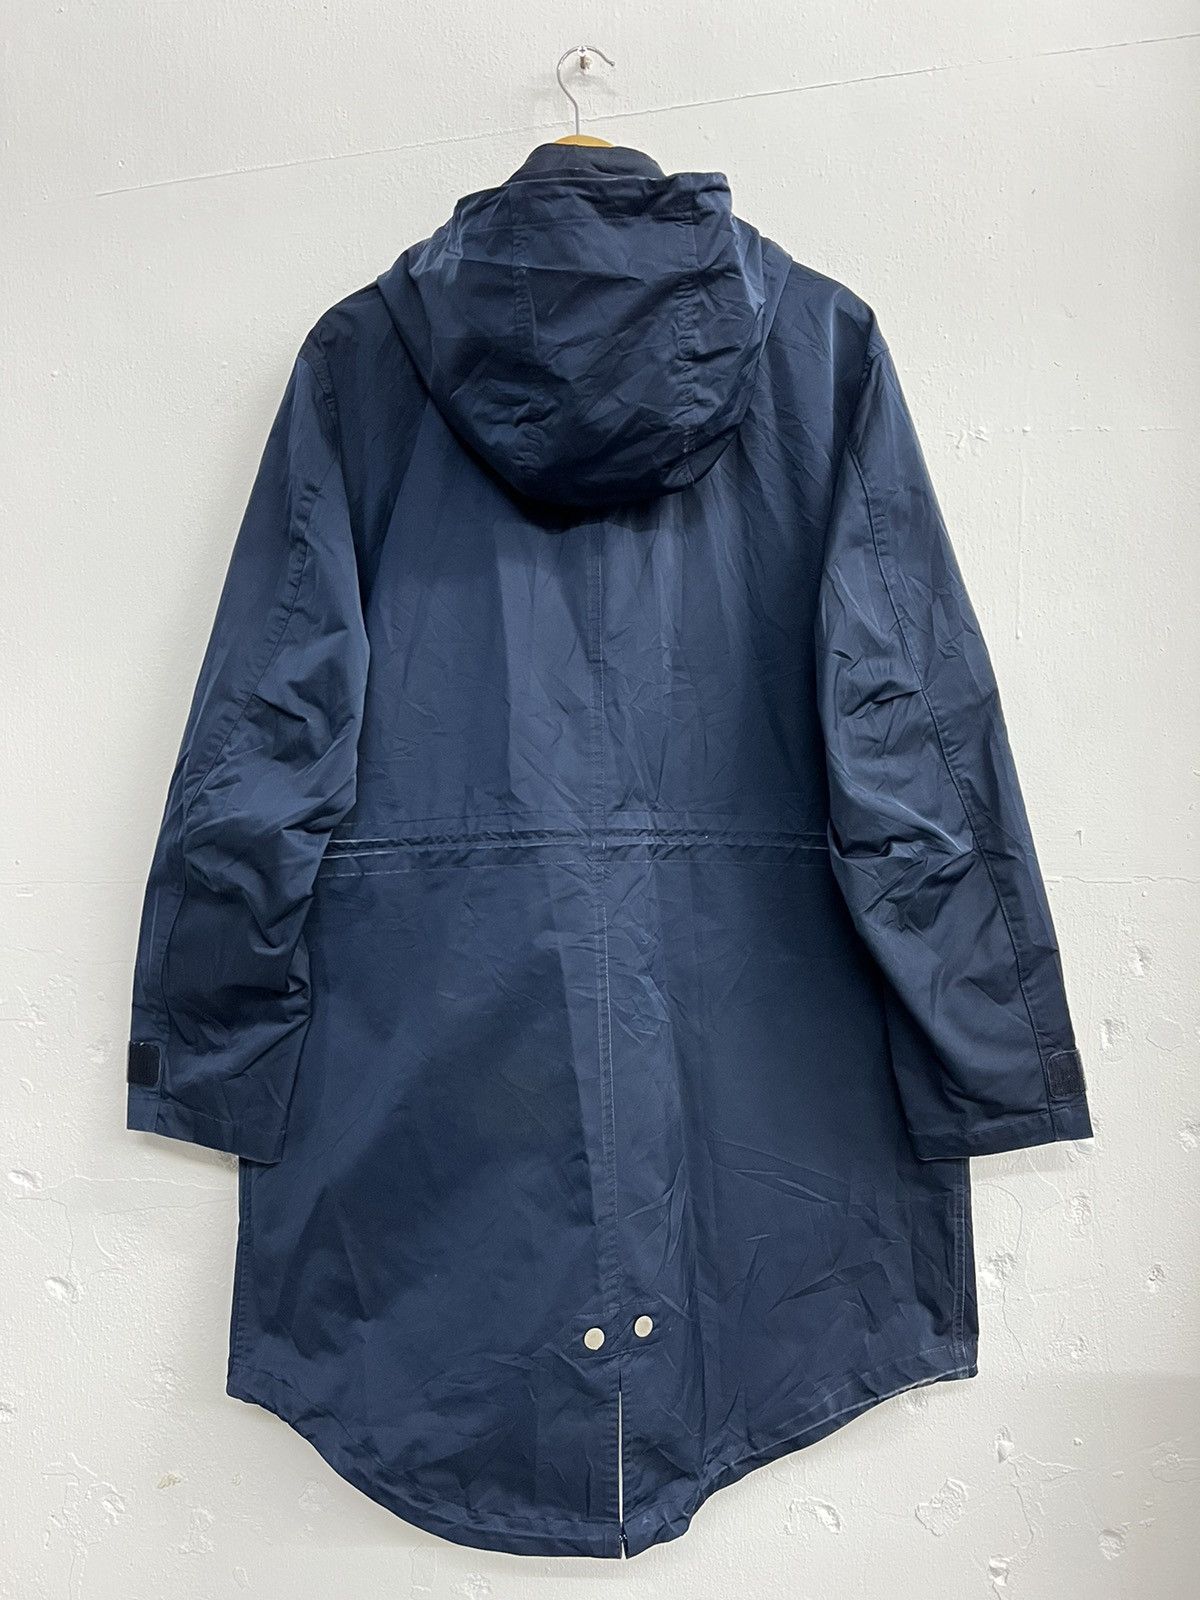 Lacoste Trench Coat - 18